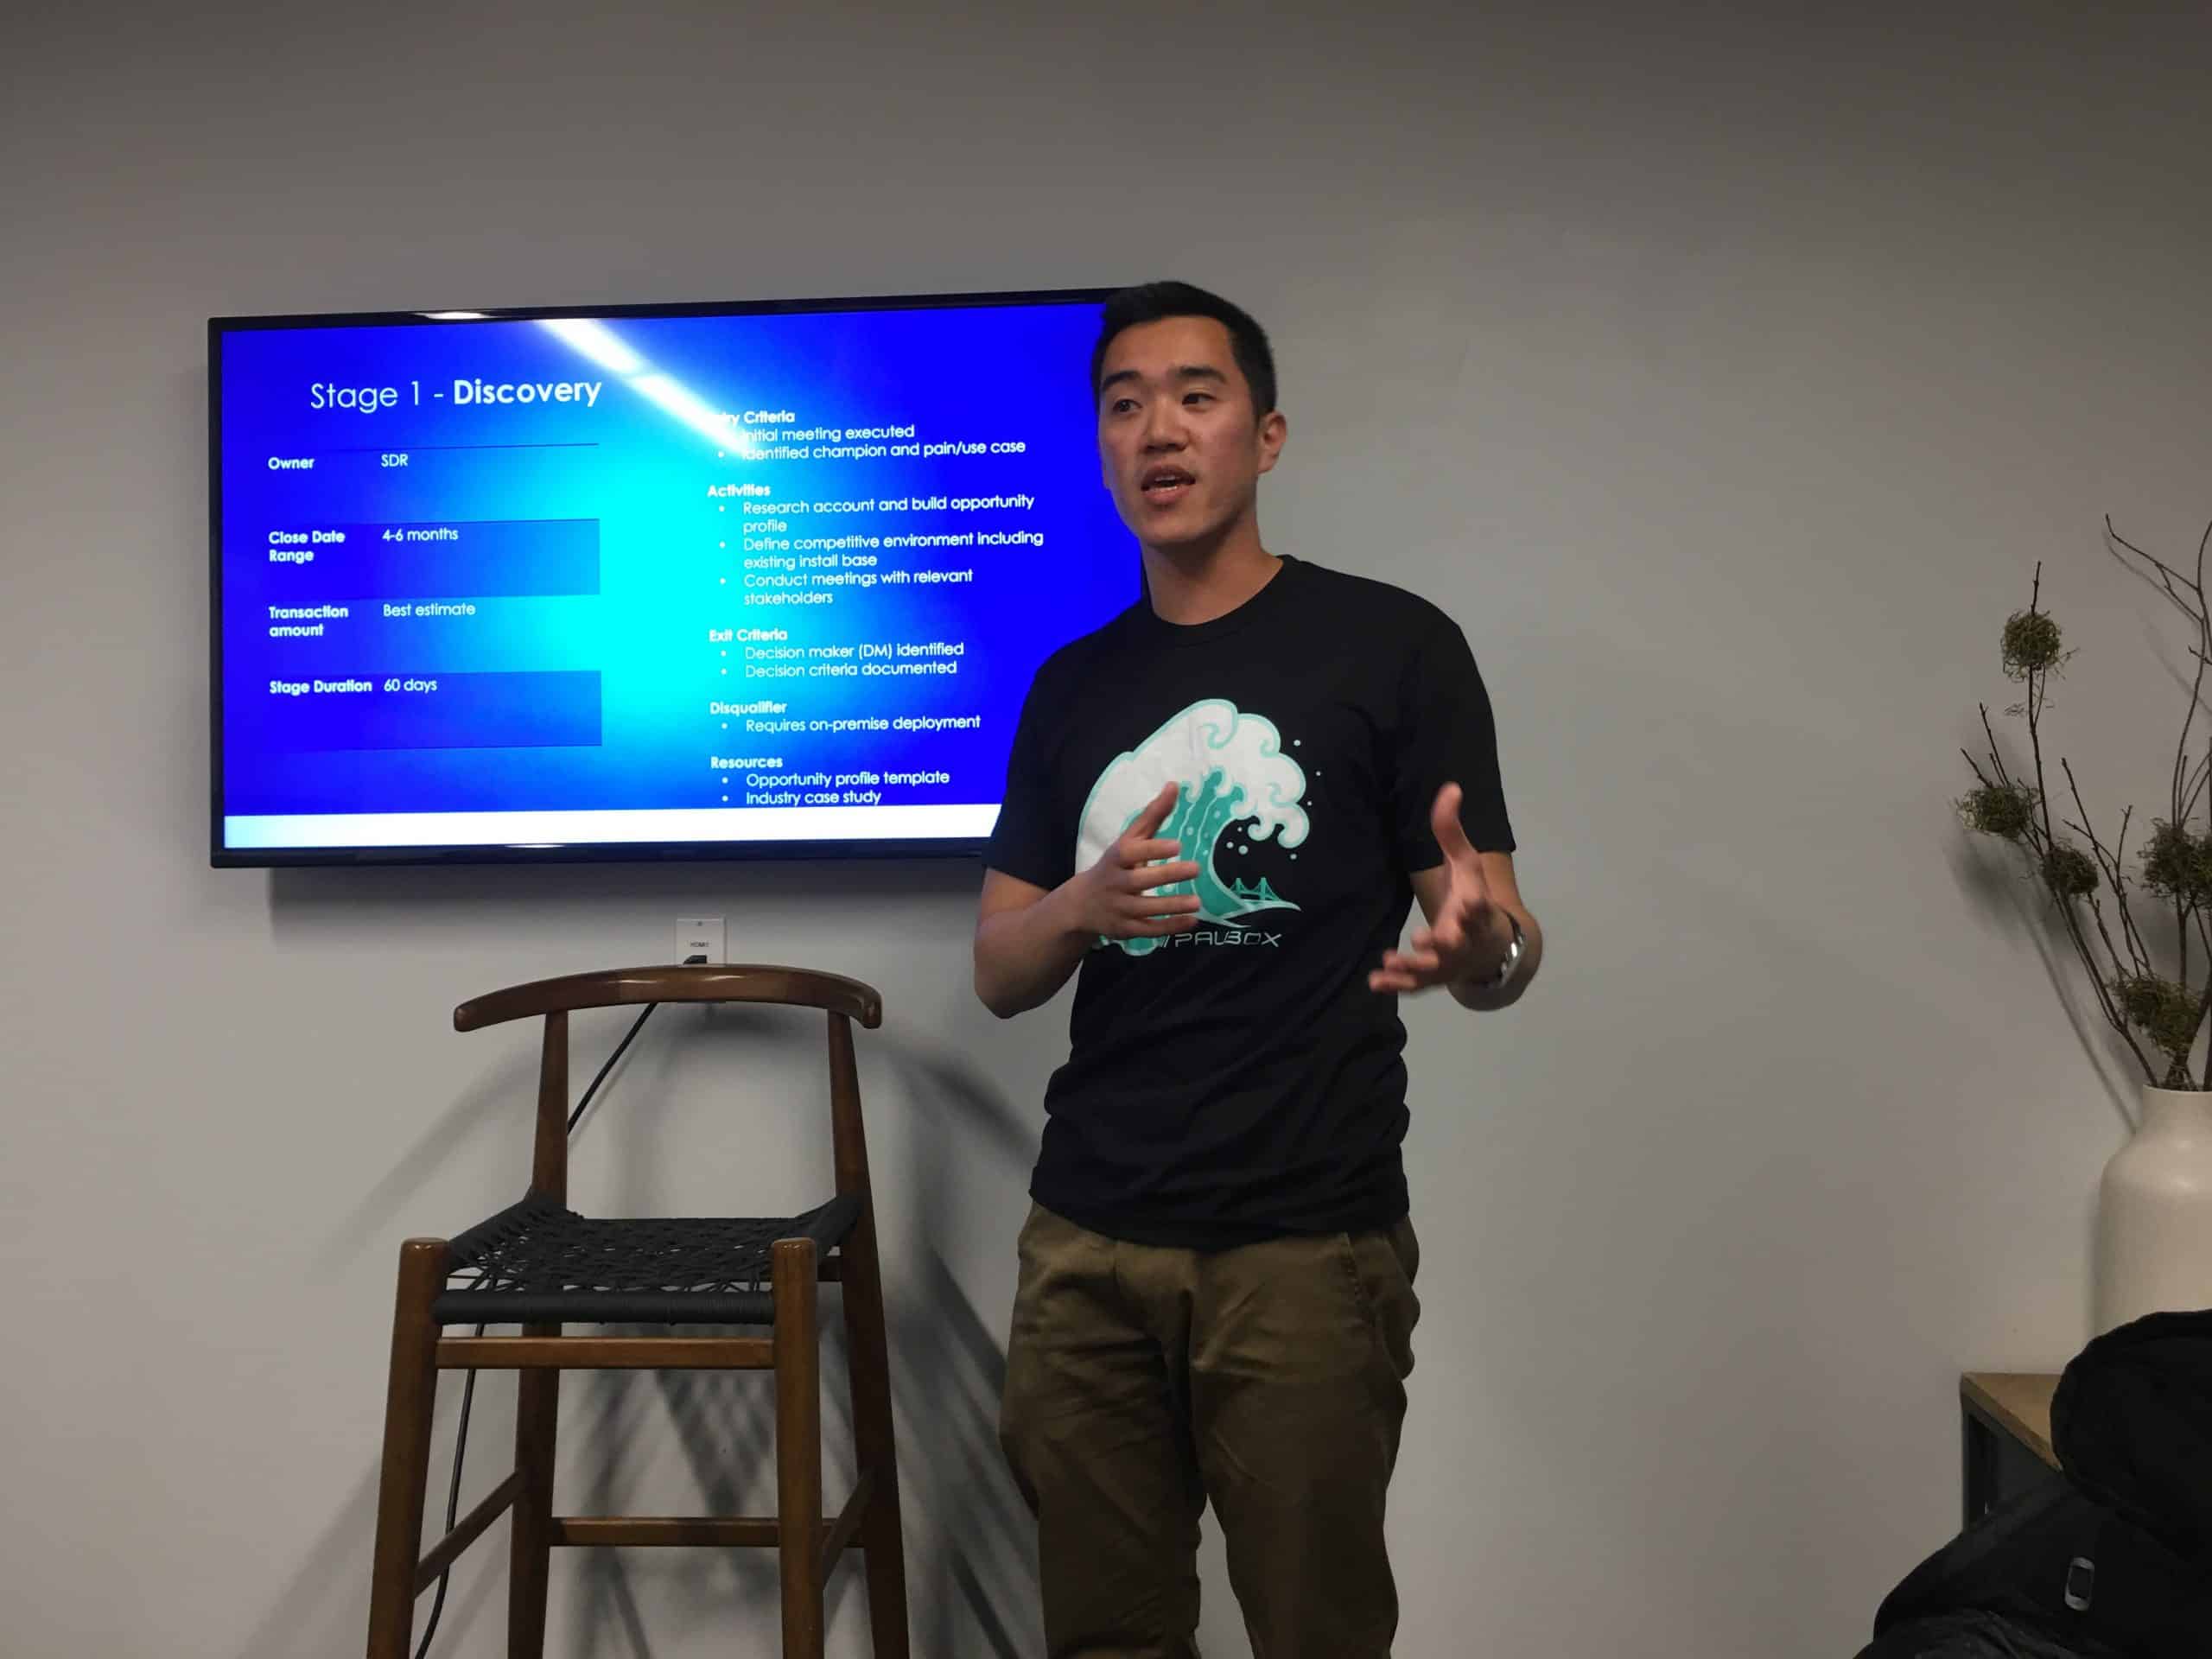 What is Weighted Pipeline and Why is it Important to Founders? - Greg Afong (Paubox)